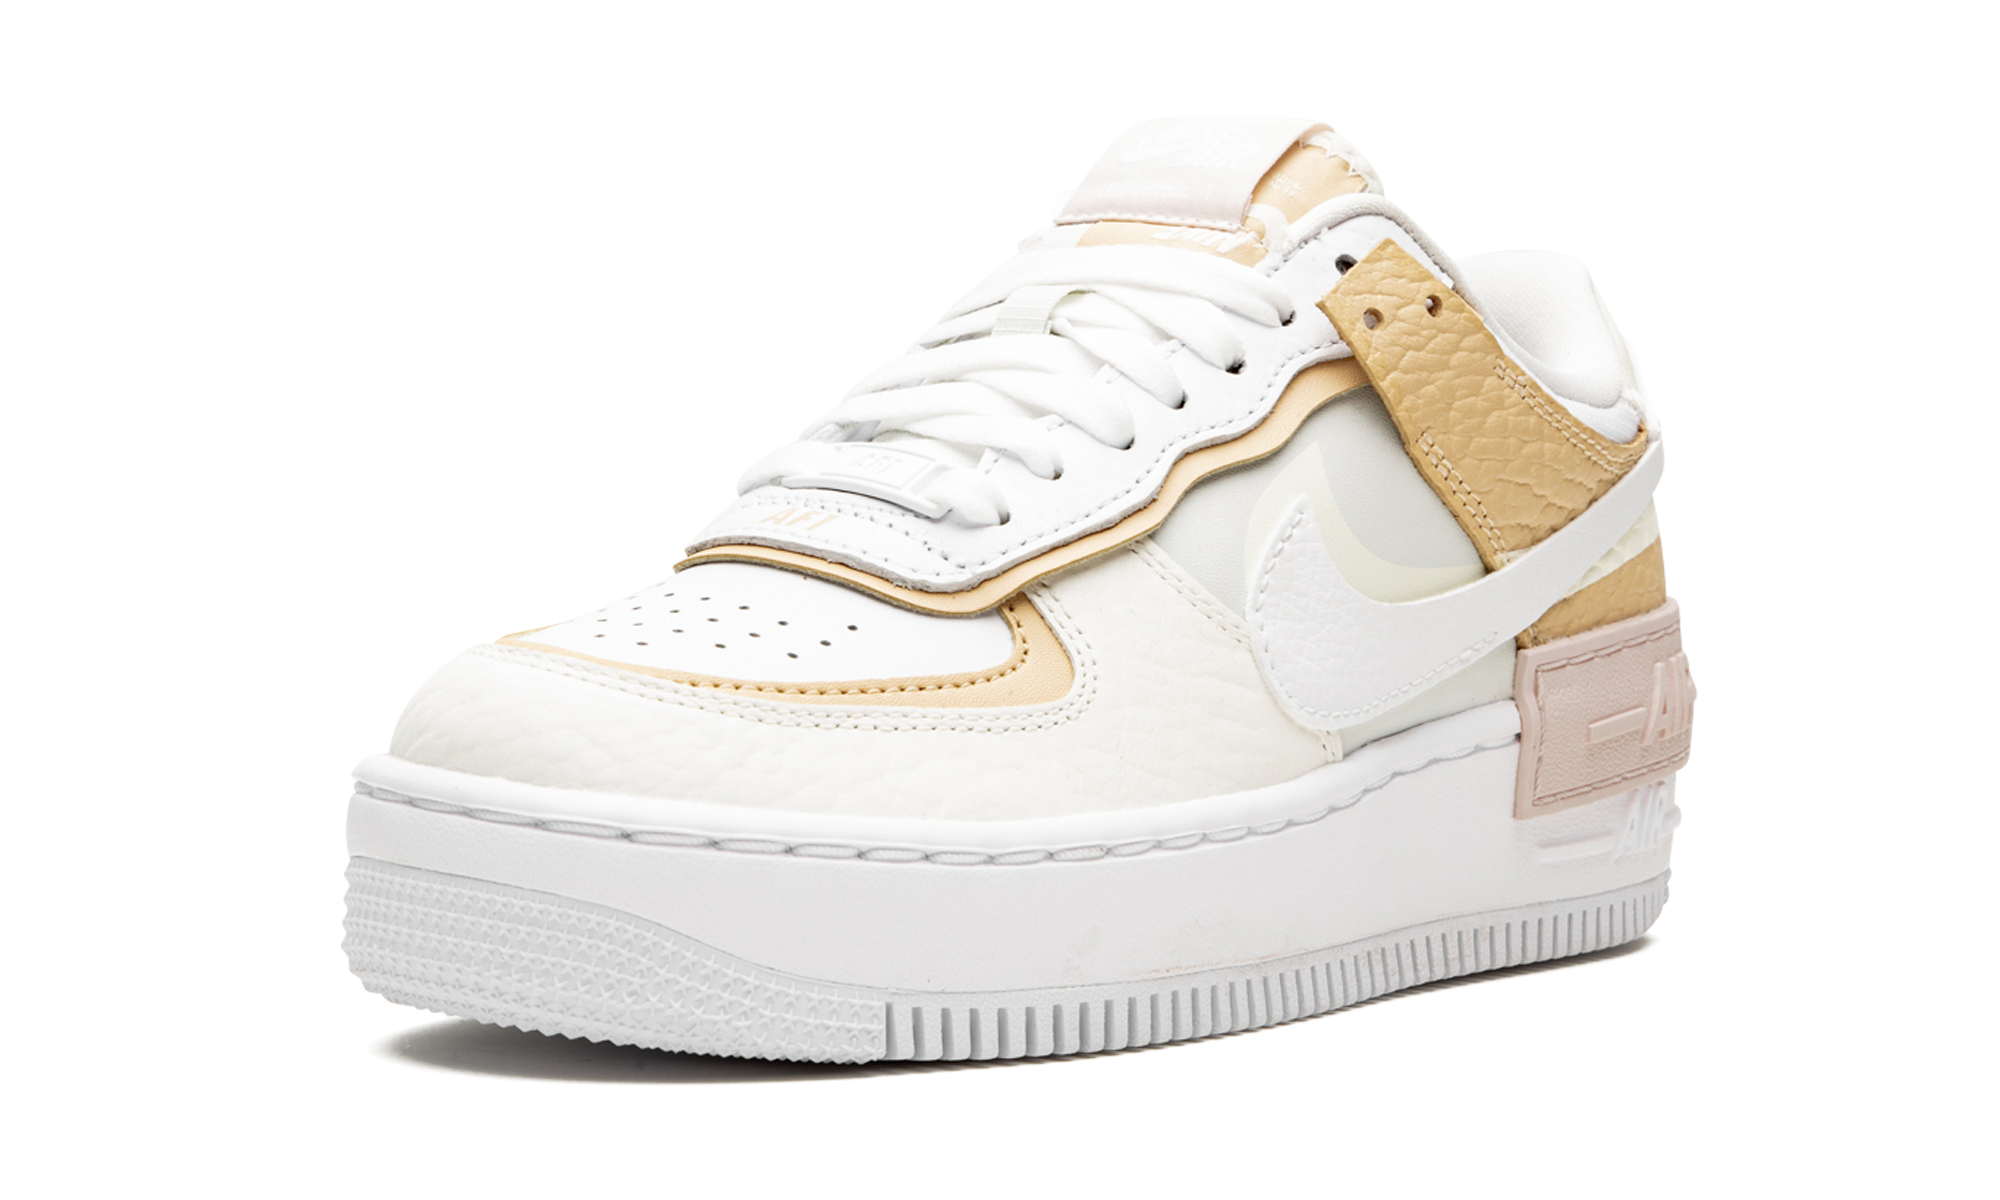 WMNS AIR FORCE 1 SHADOW SE